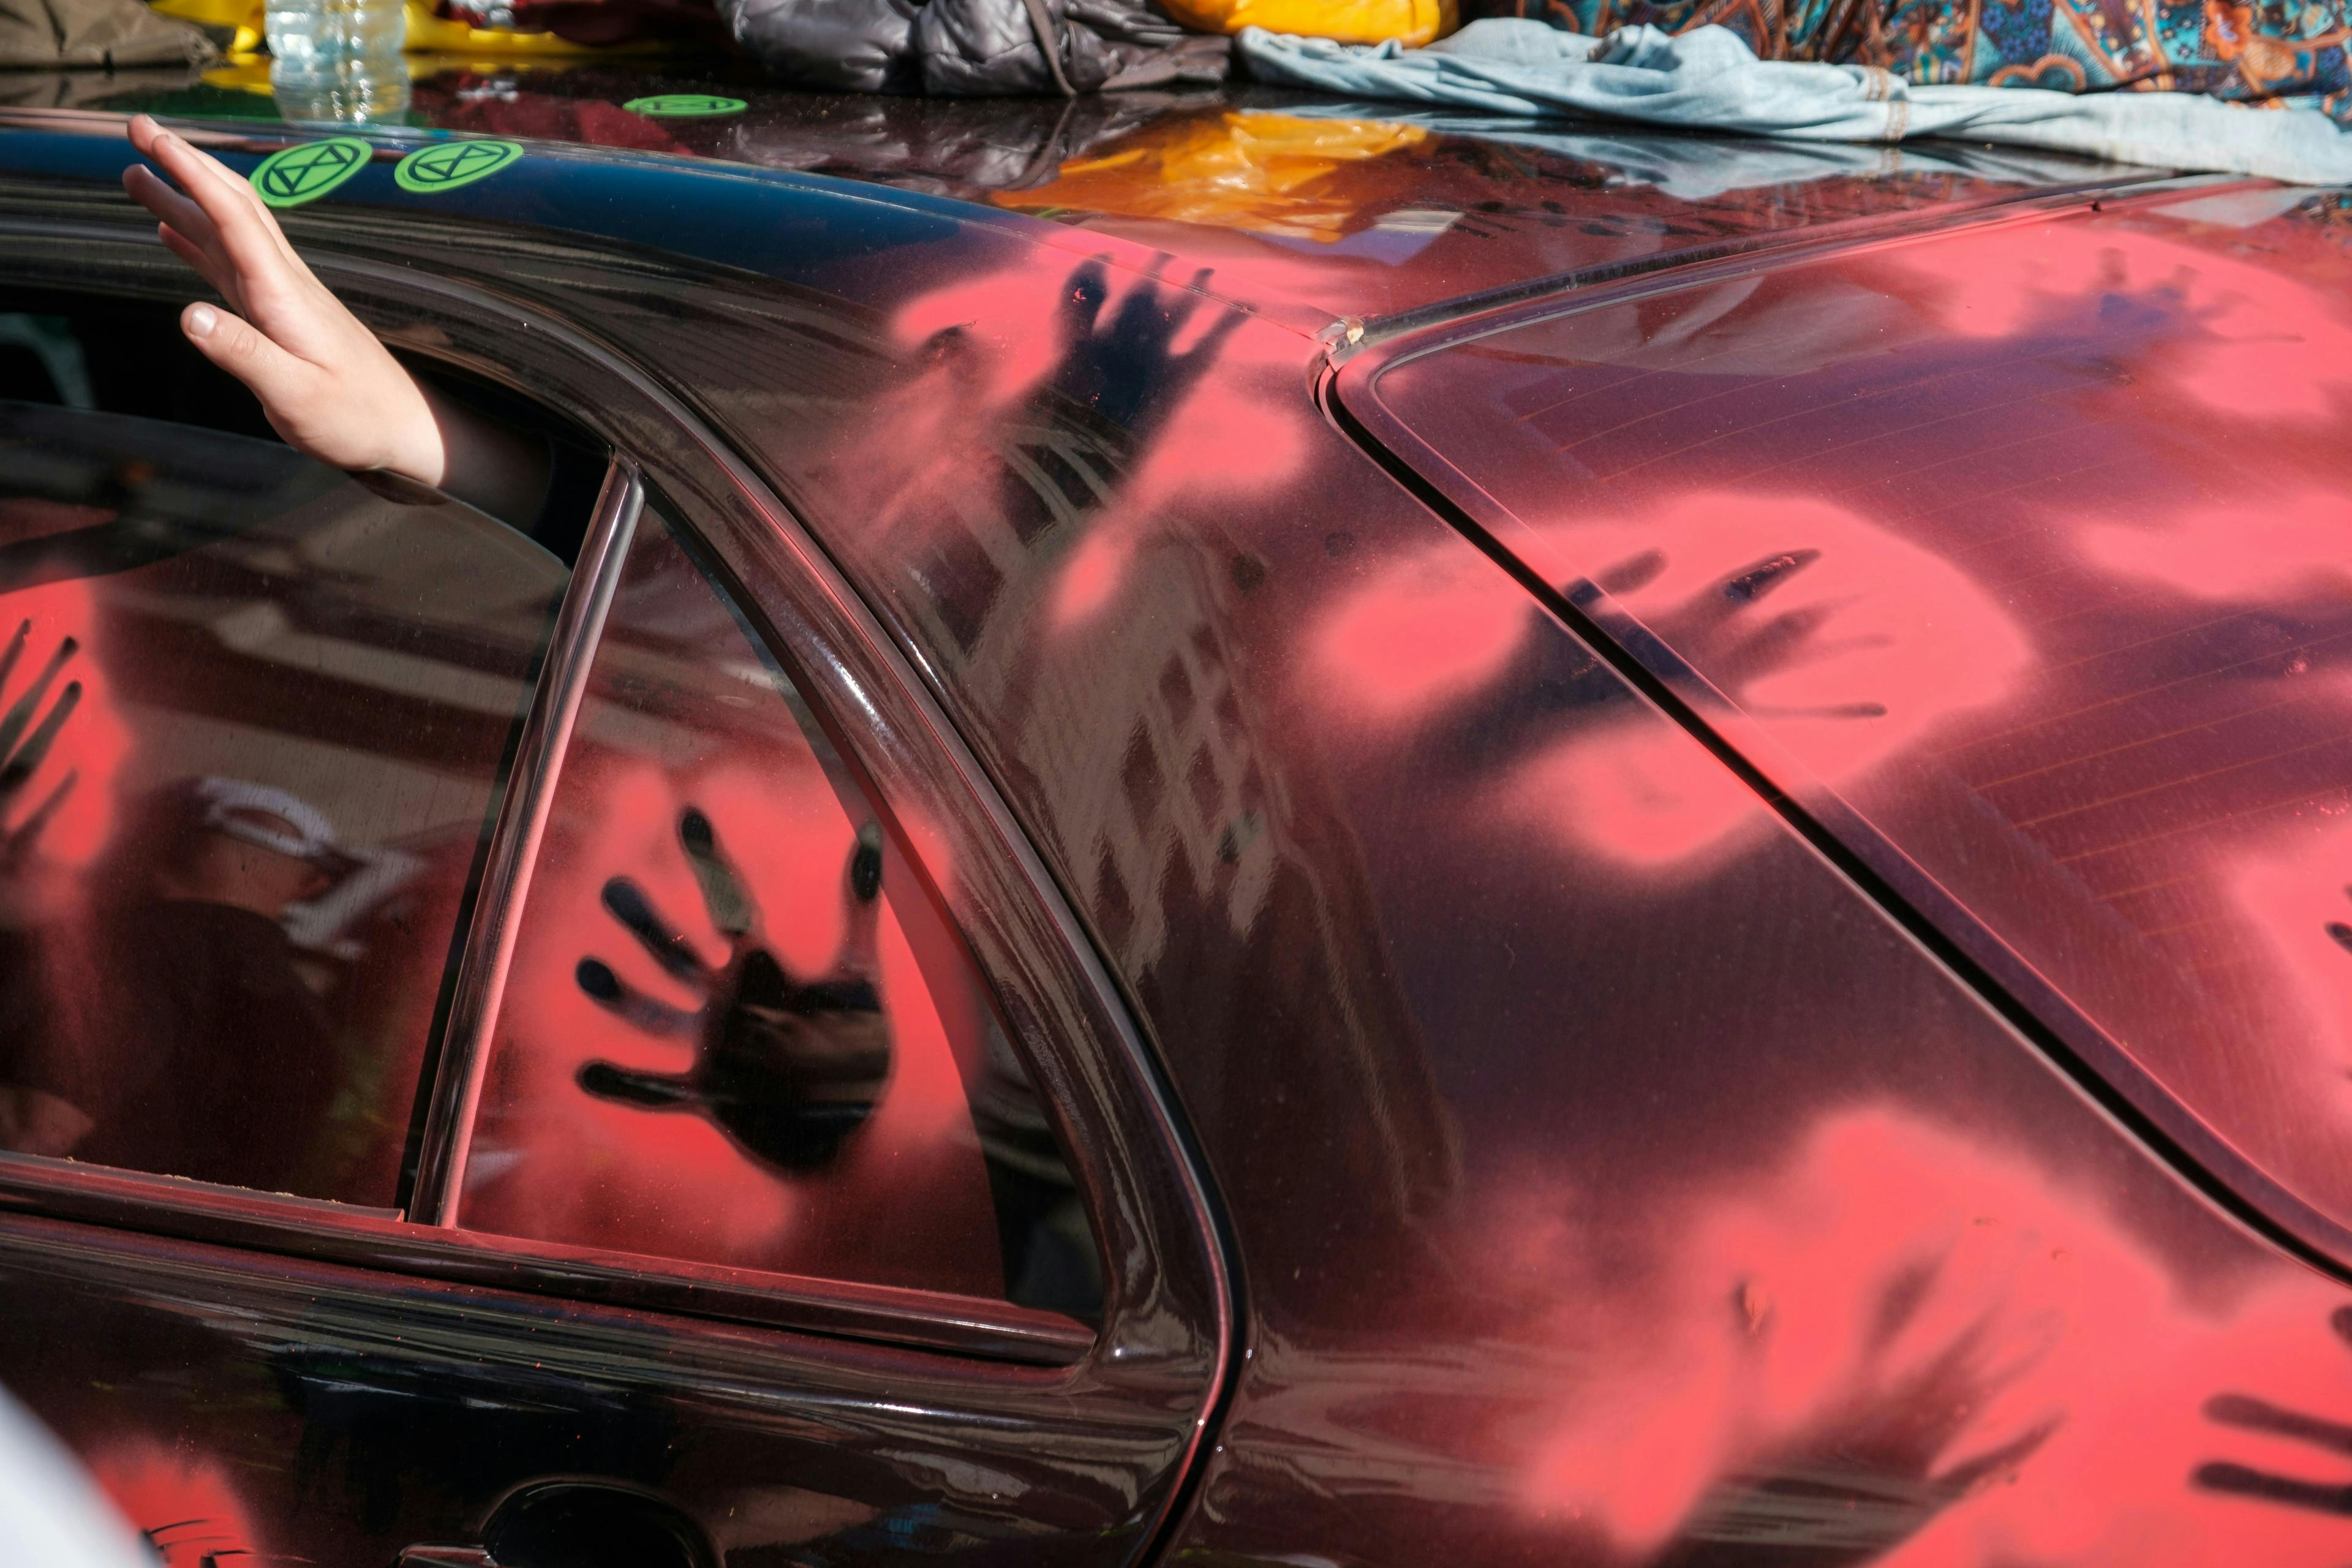 a hand print on the side of a red car